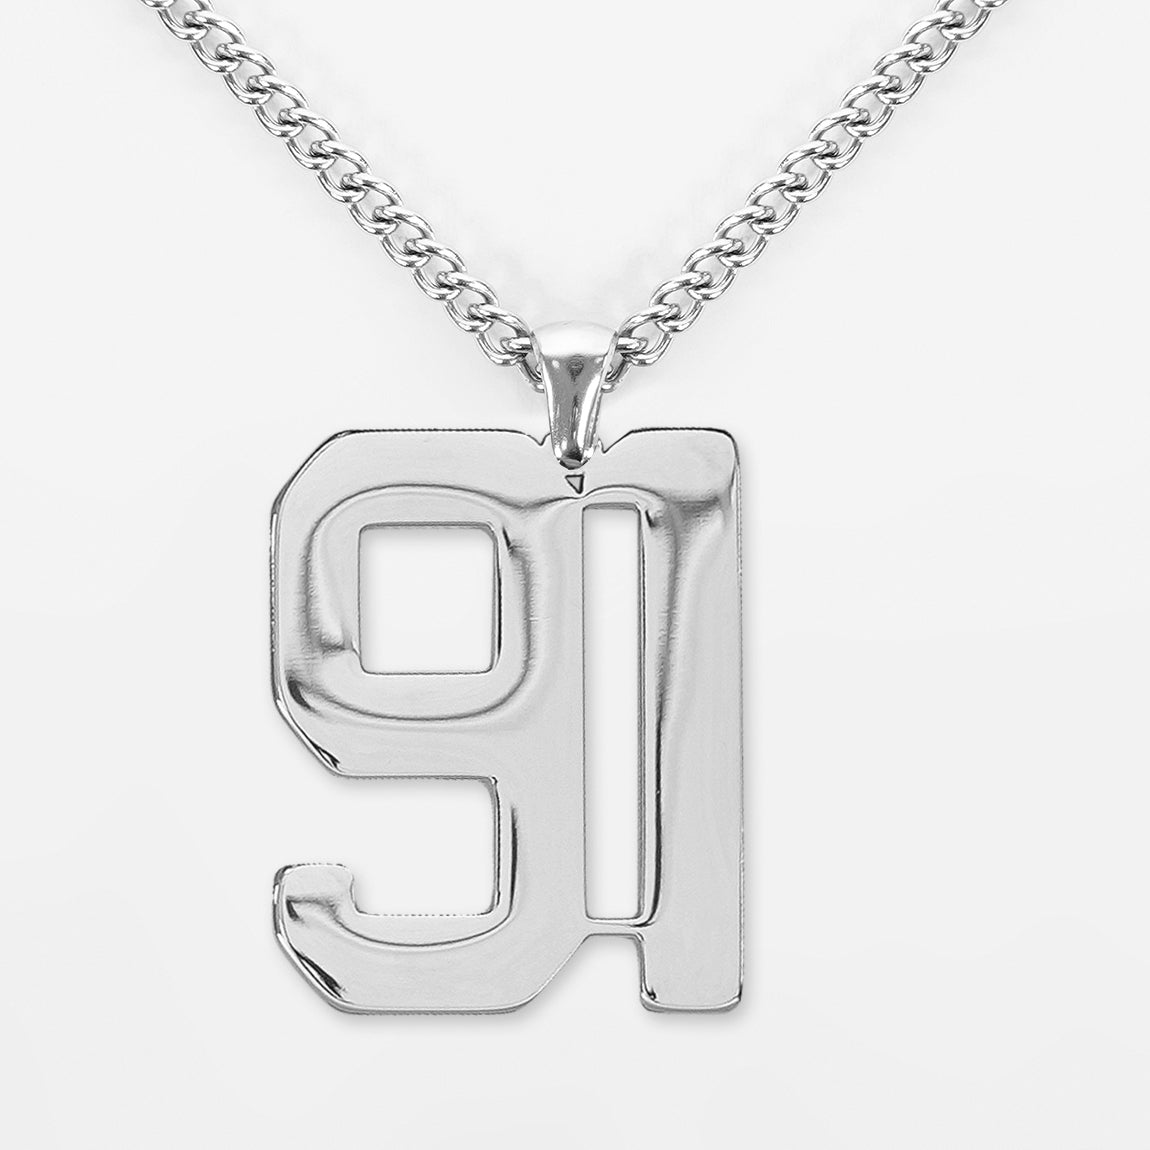 91 Number Pendant with Chain Necklace - Stainless Steel